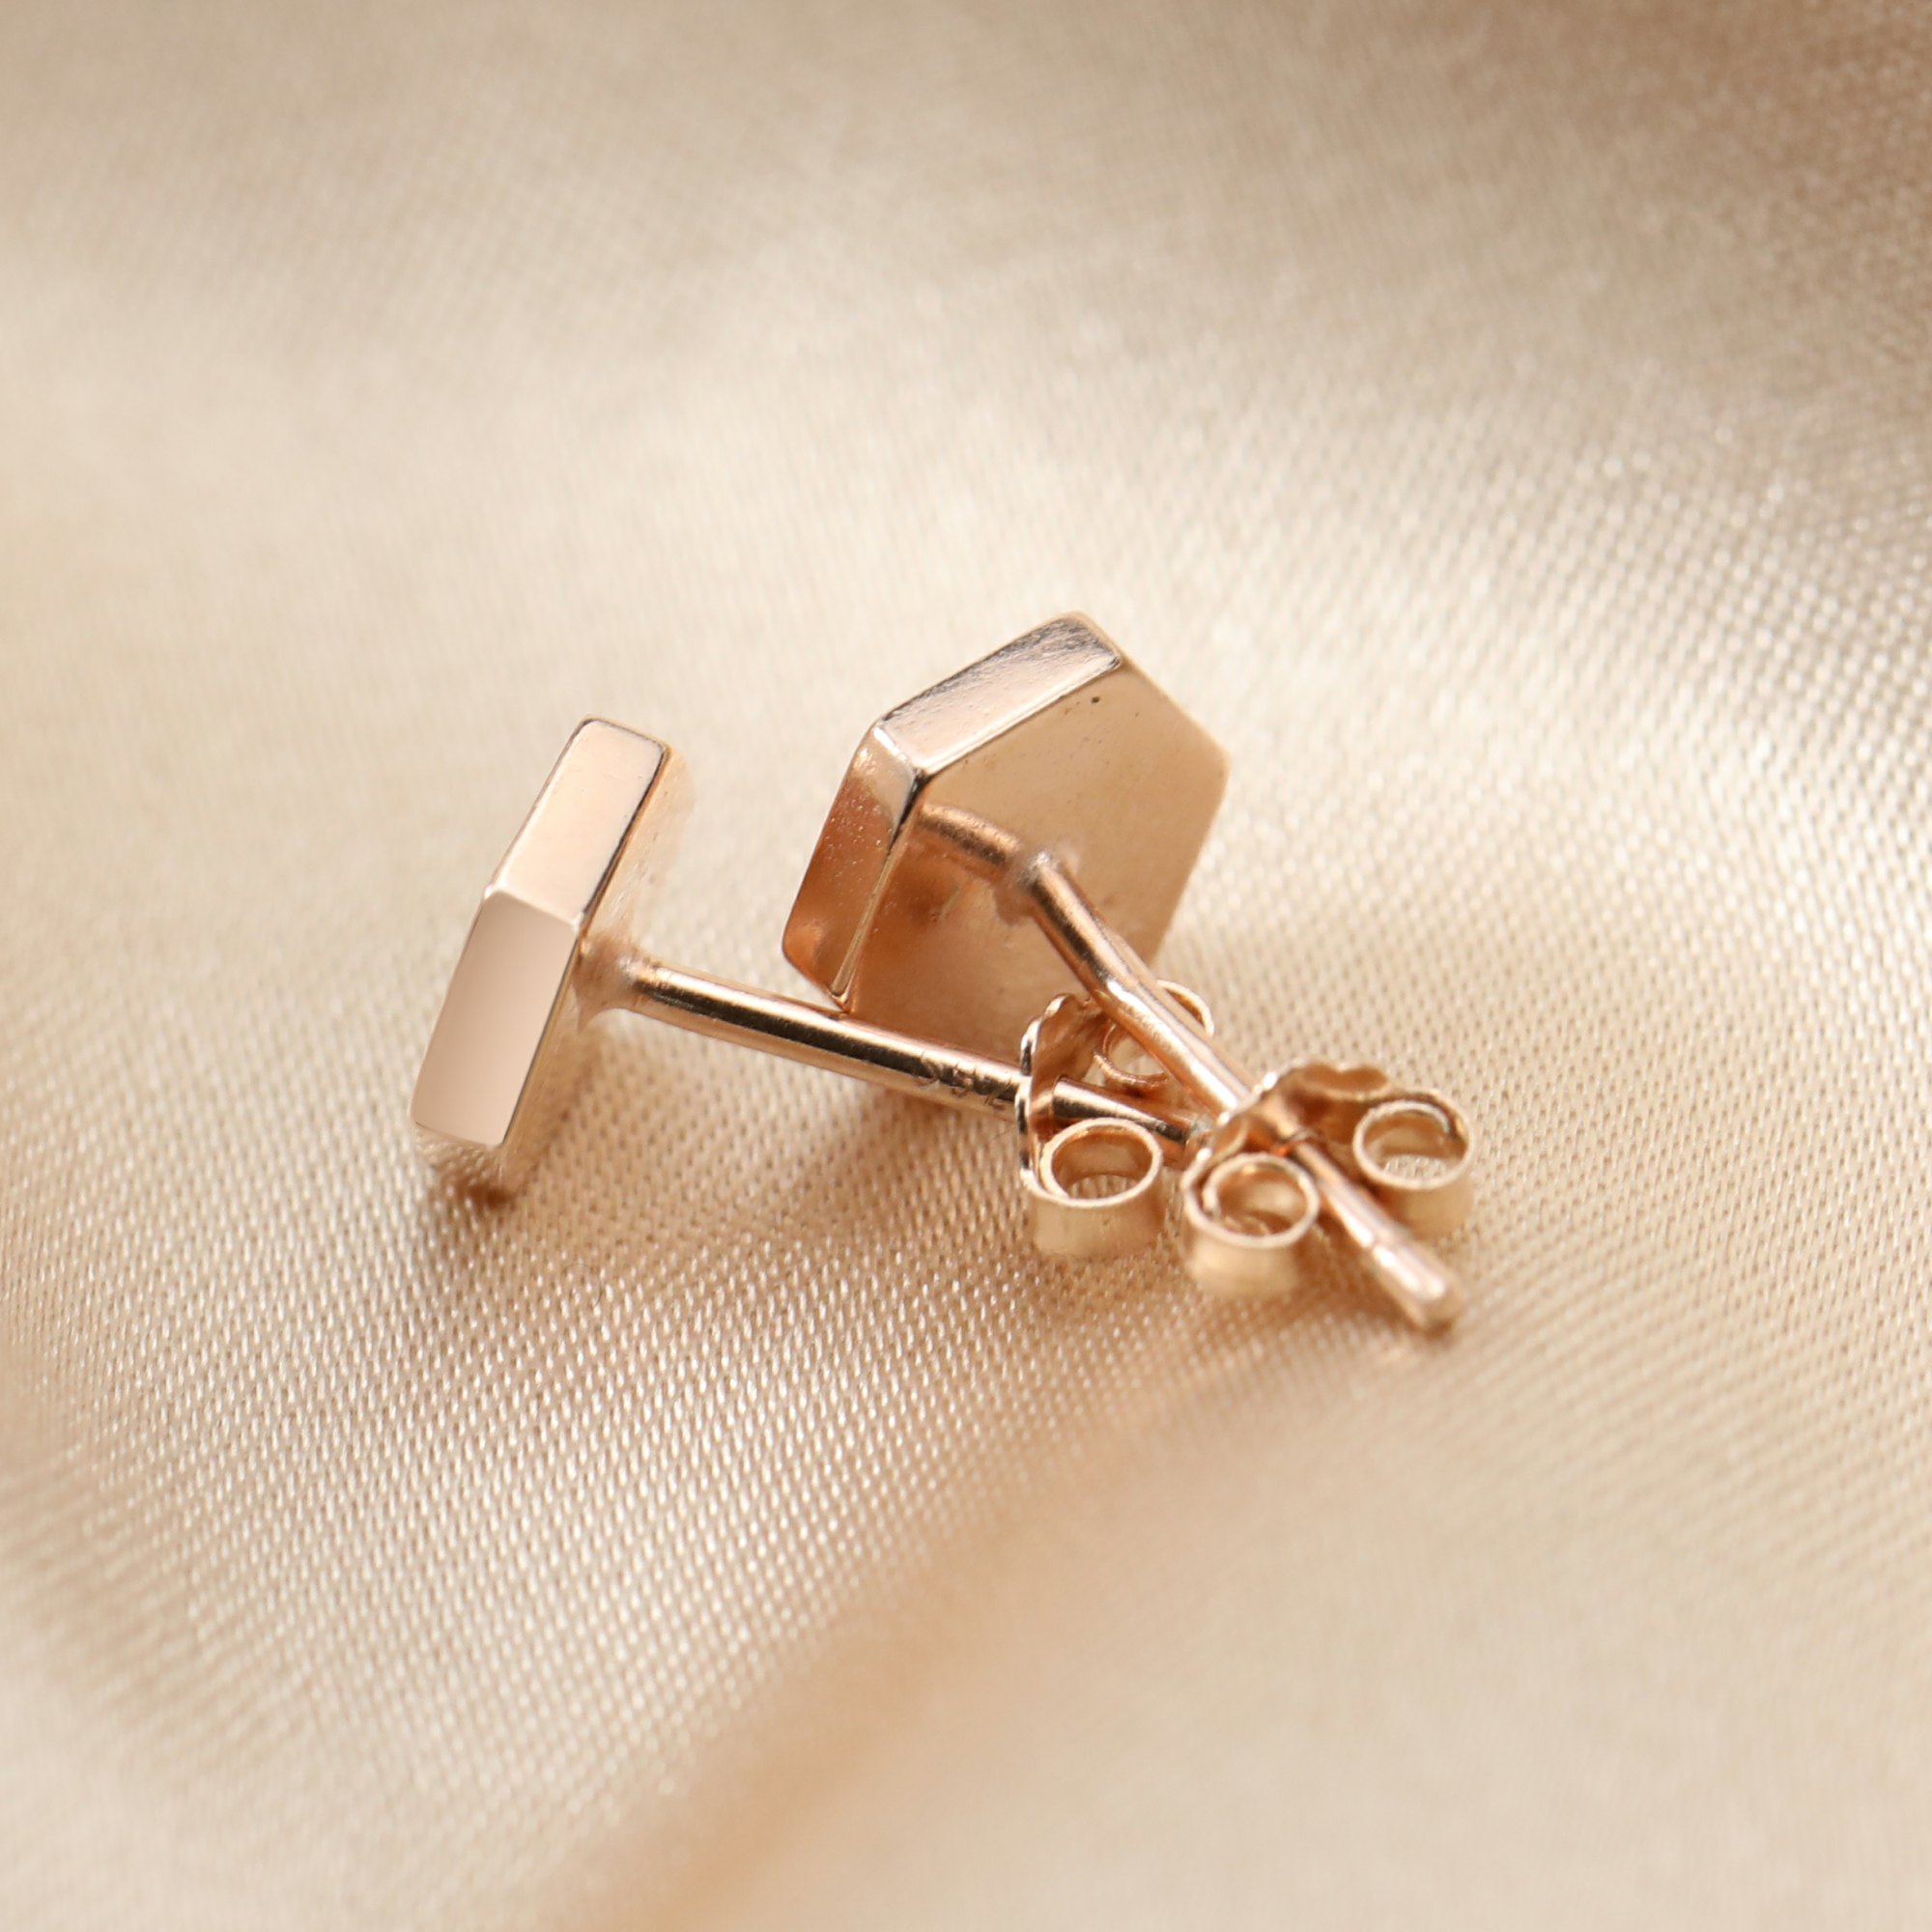 Keepsake Breast Milk Resin 6.5MM Hexagon Earrings Blank Settings Rose Gold Plated Solid 925 Sterling Silver Studs Earrings Supplies 1706081 - Click Image to Close